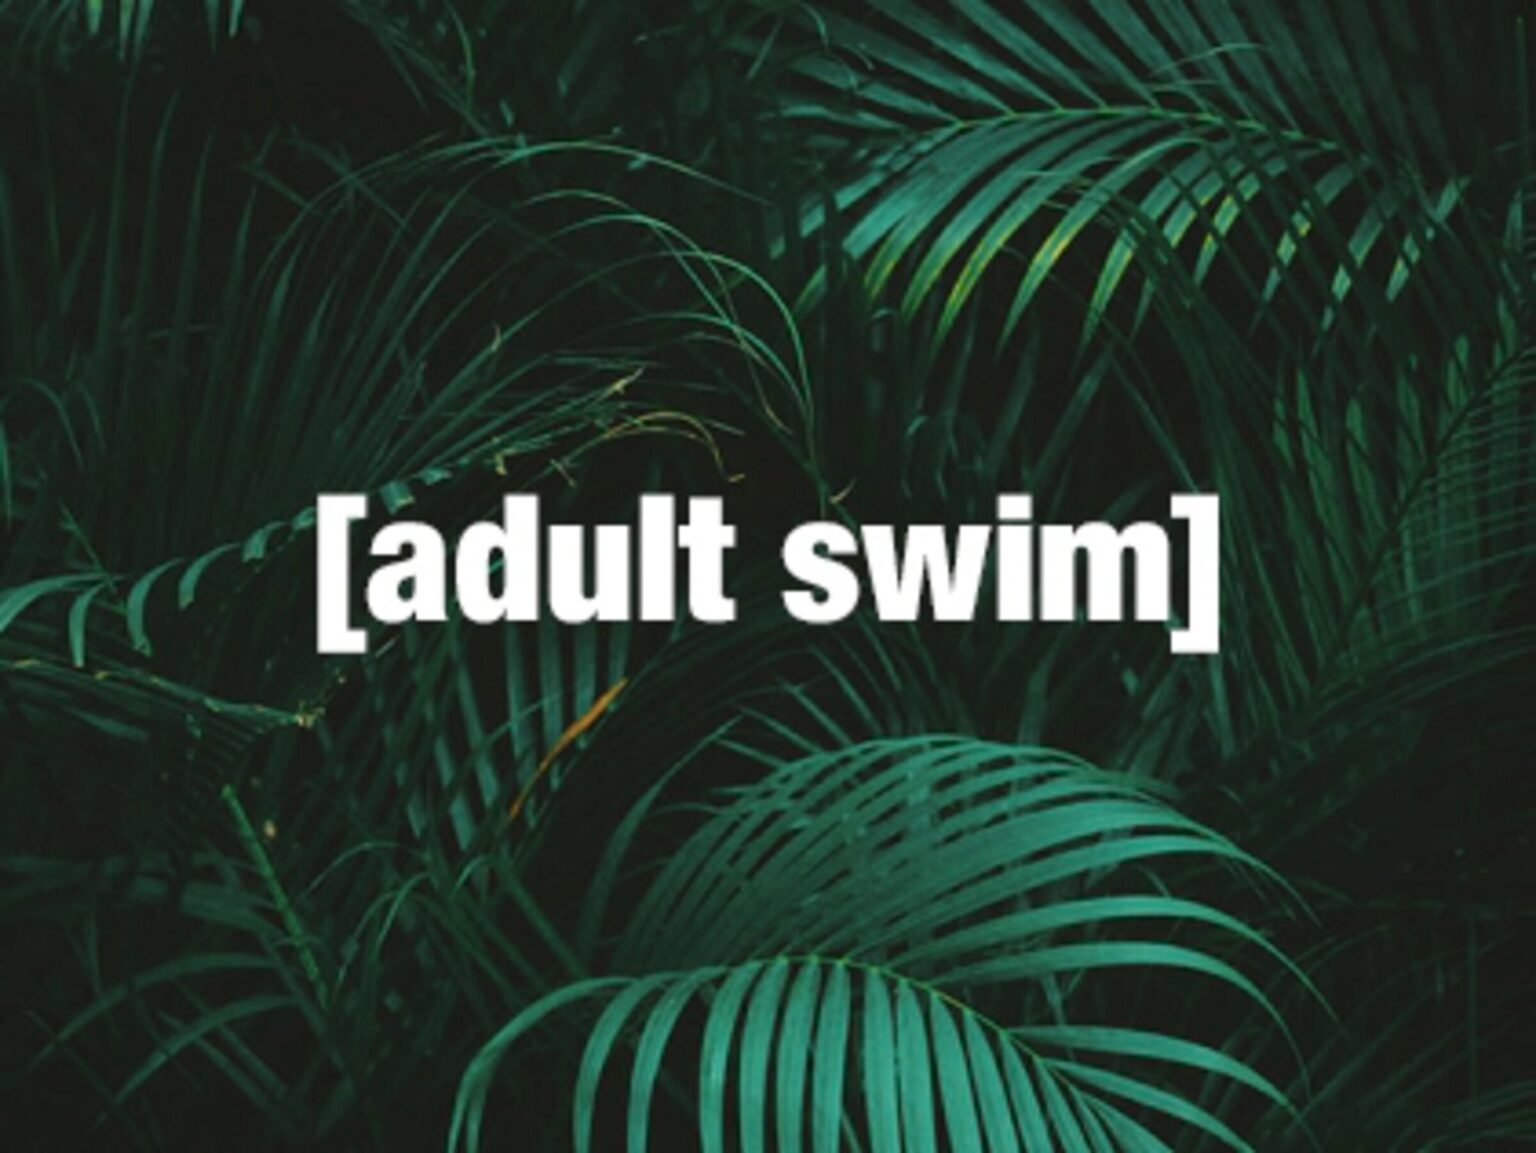 Adult Swim shows have a reputation for being geared towards a more adult audience. Watch these hilarious animations and get ready to laugh.